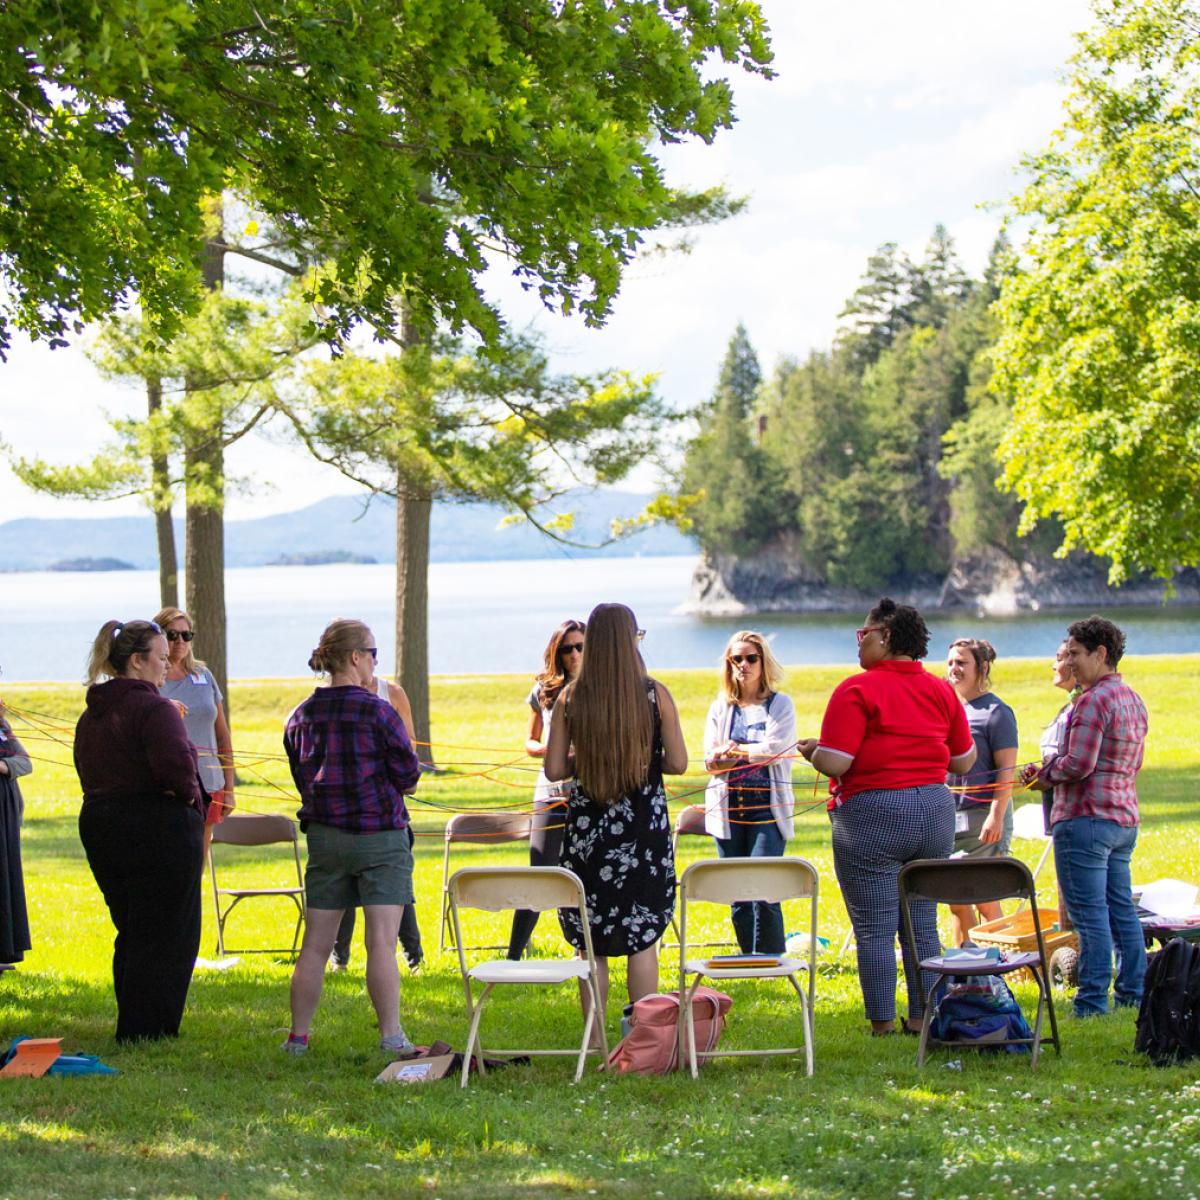 Educators gather outdoors at a recent Northeast Farm to School Institute summer retreat, learning together on the shores of Lake Champlain.